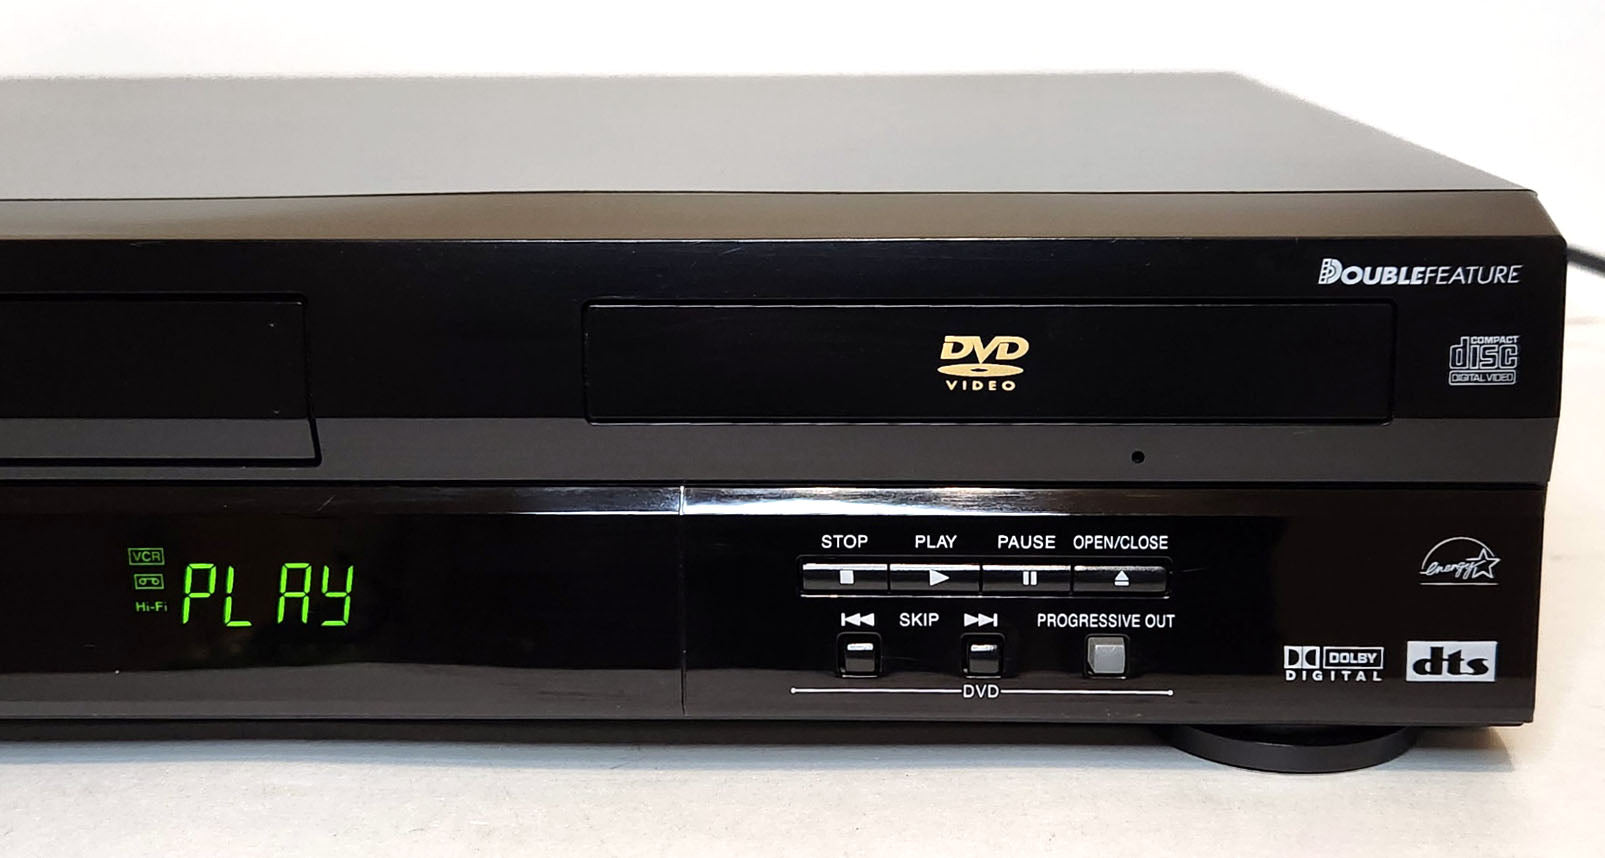 Panasonic PV-D4743 Omnivision VCR/DVD Player Combo - Right